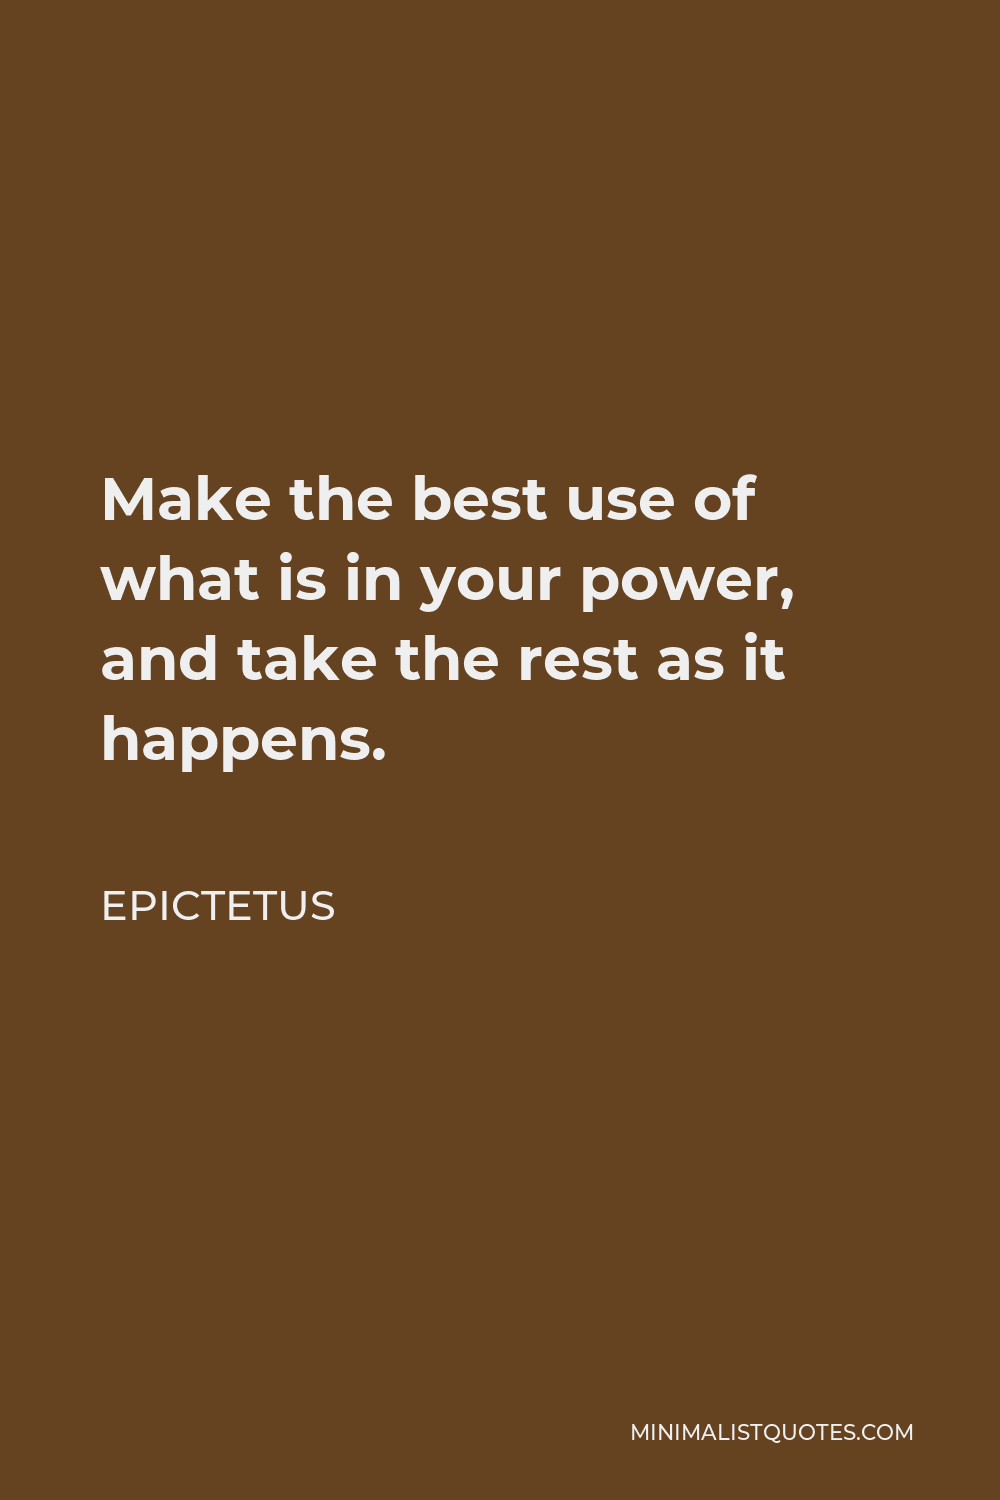 Epictetus Quote - Make the best use of what is in your power, and take the rest as it happens.